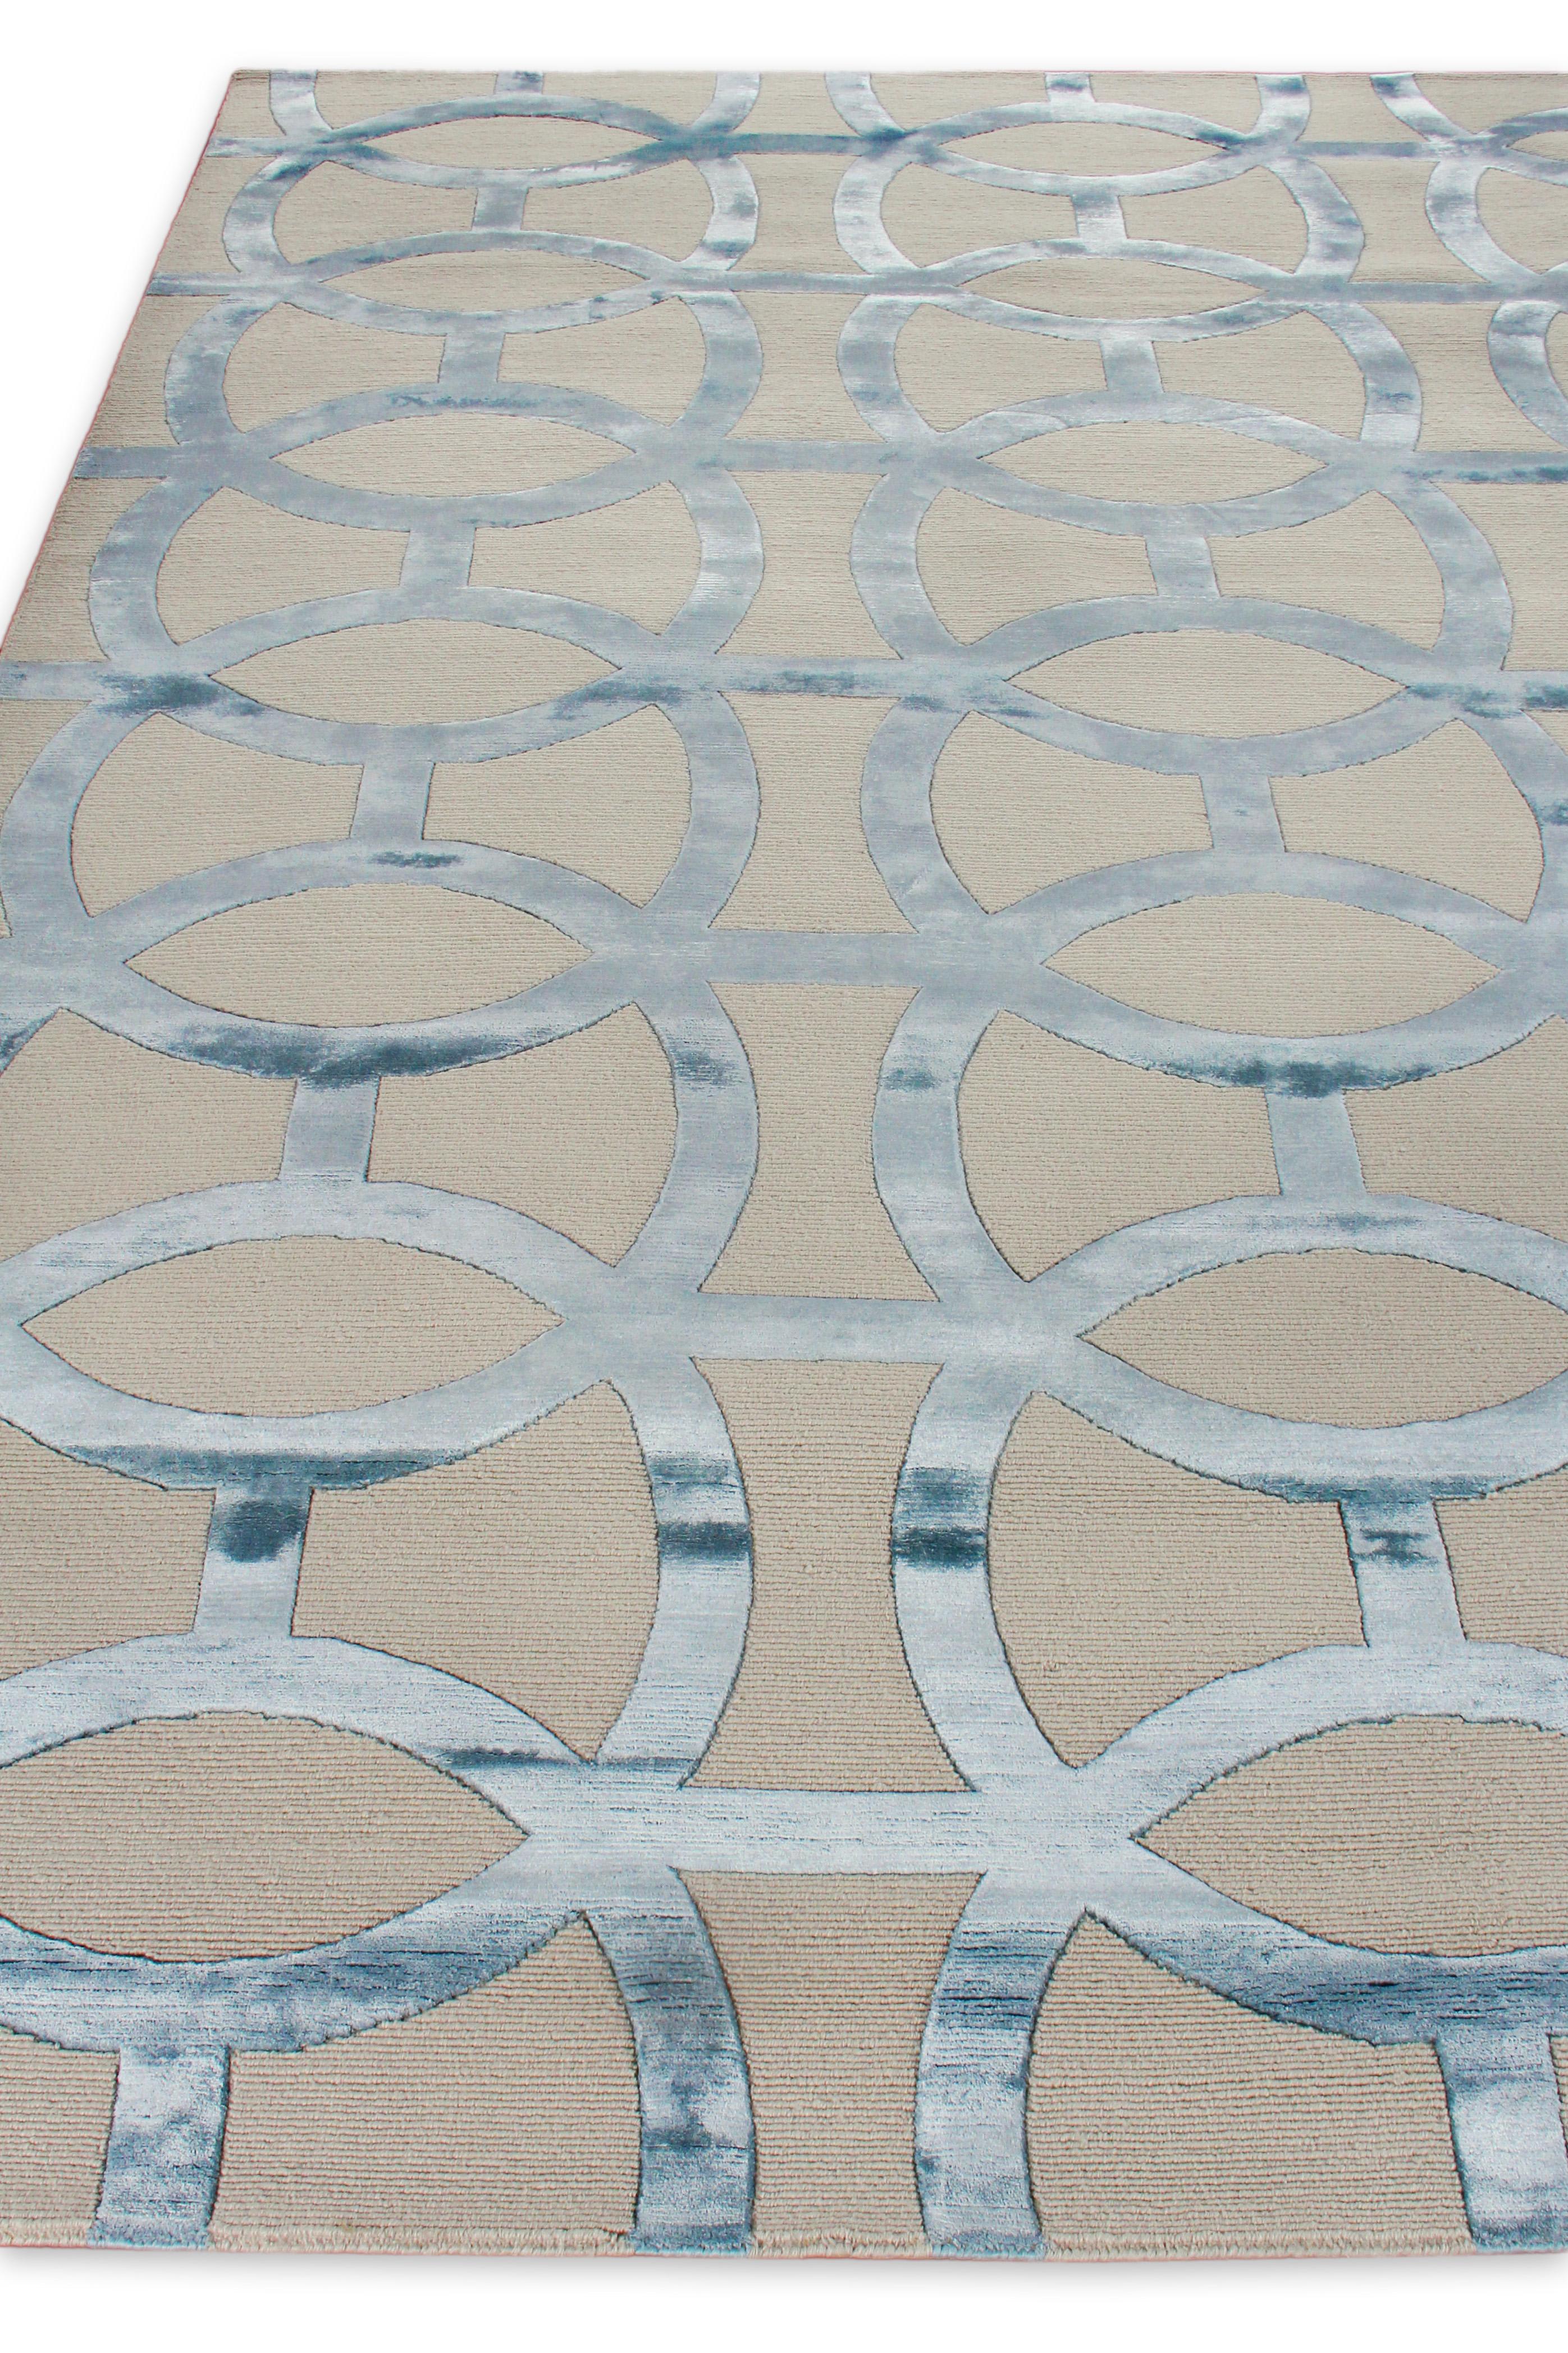 blue silver area rugs